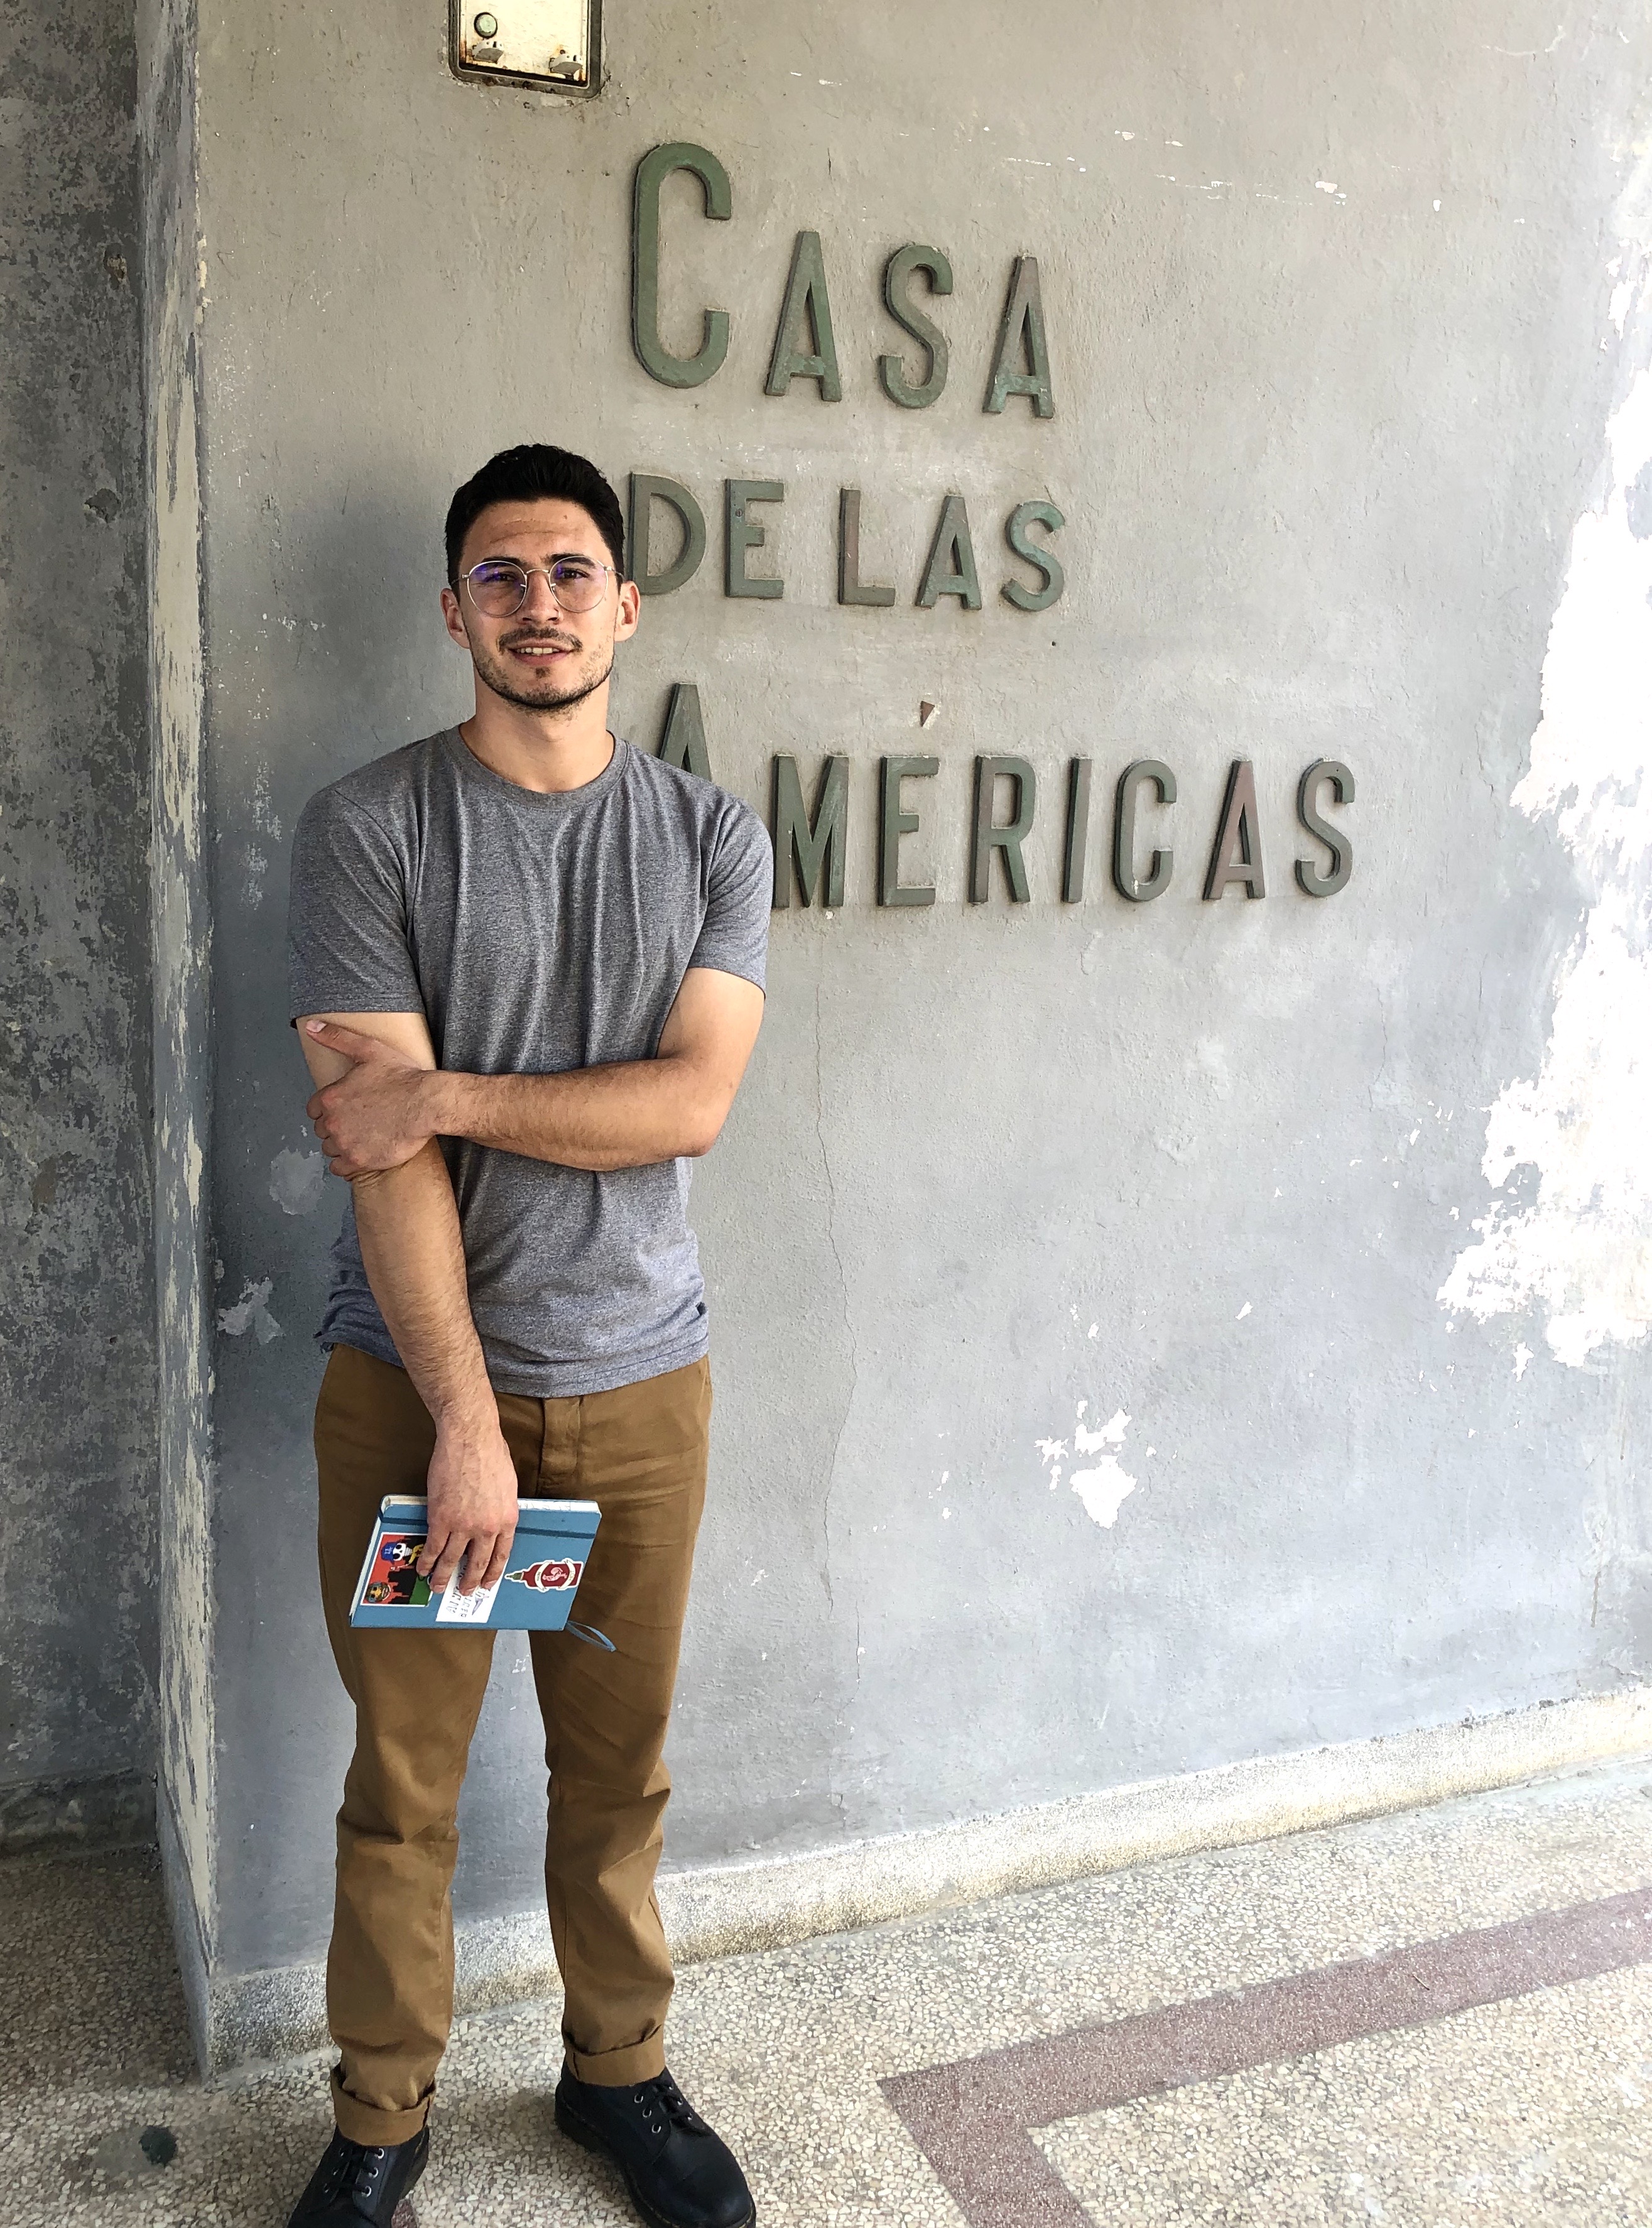 UCSB Graduate Student at Casa de las Américas October 2019, Sponsored by The Global Latinidades Project